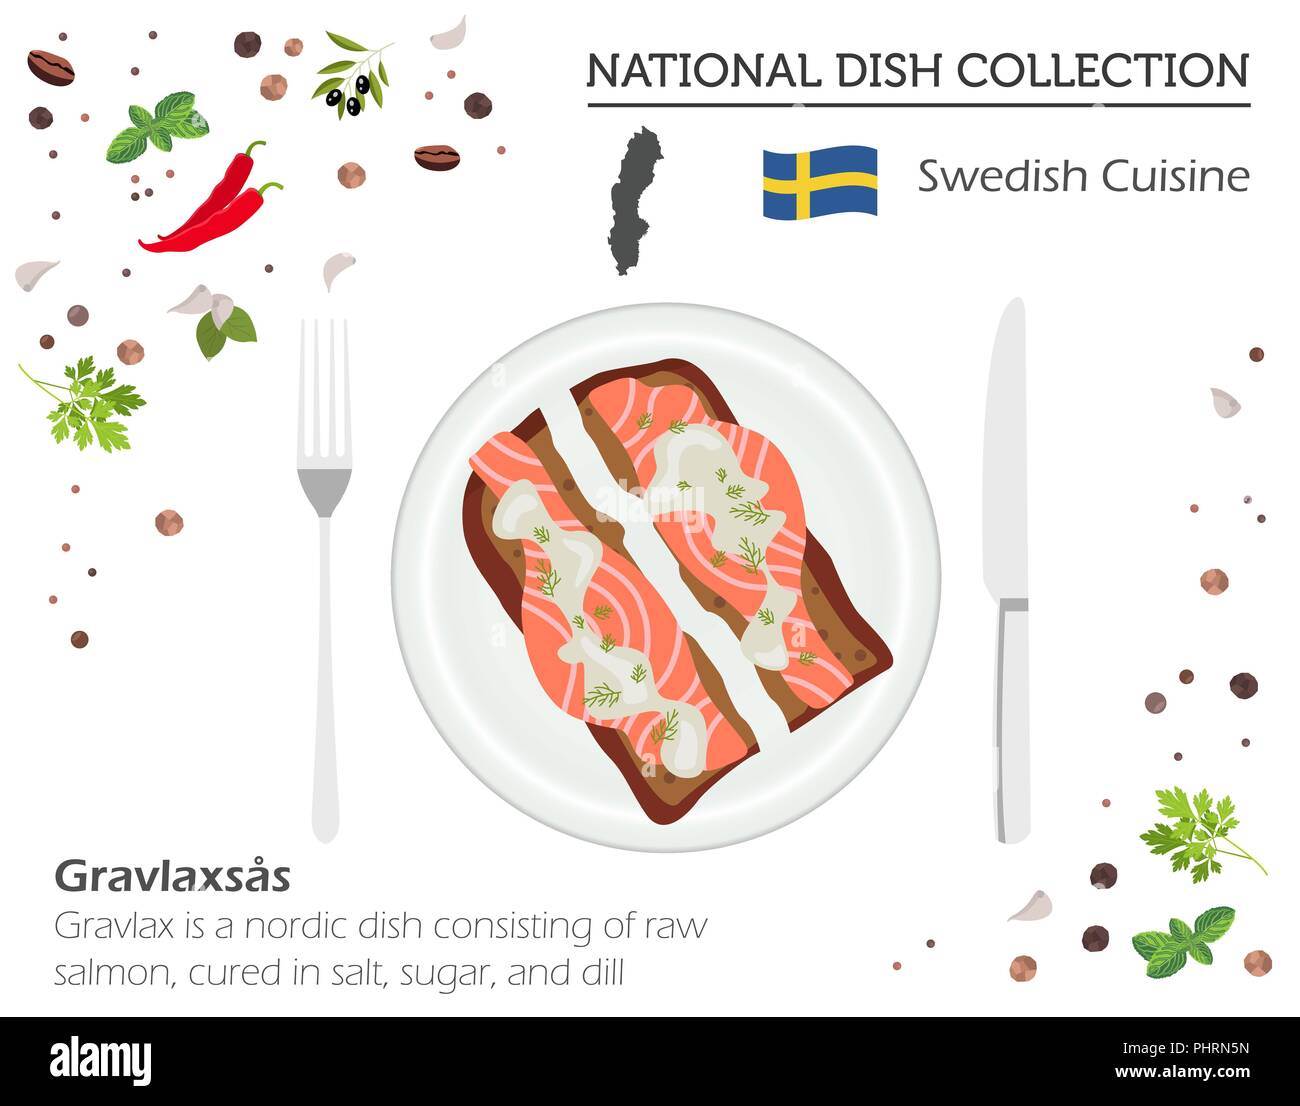 Sweden Cuisine. European national dish collection. Raw salmon sandwich isolated on white, infographic. Vector illustration Stock Vector